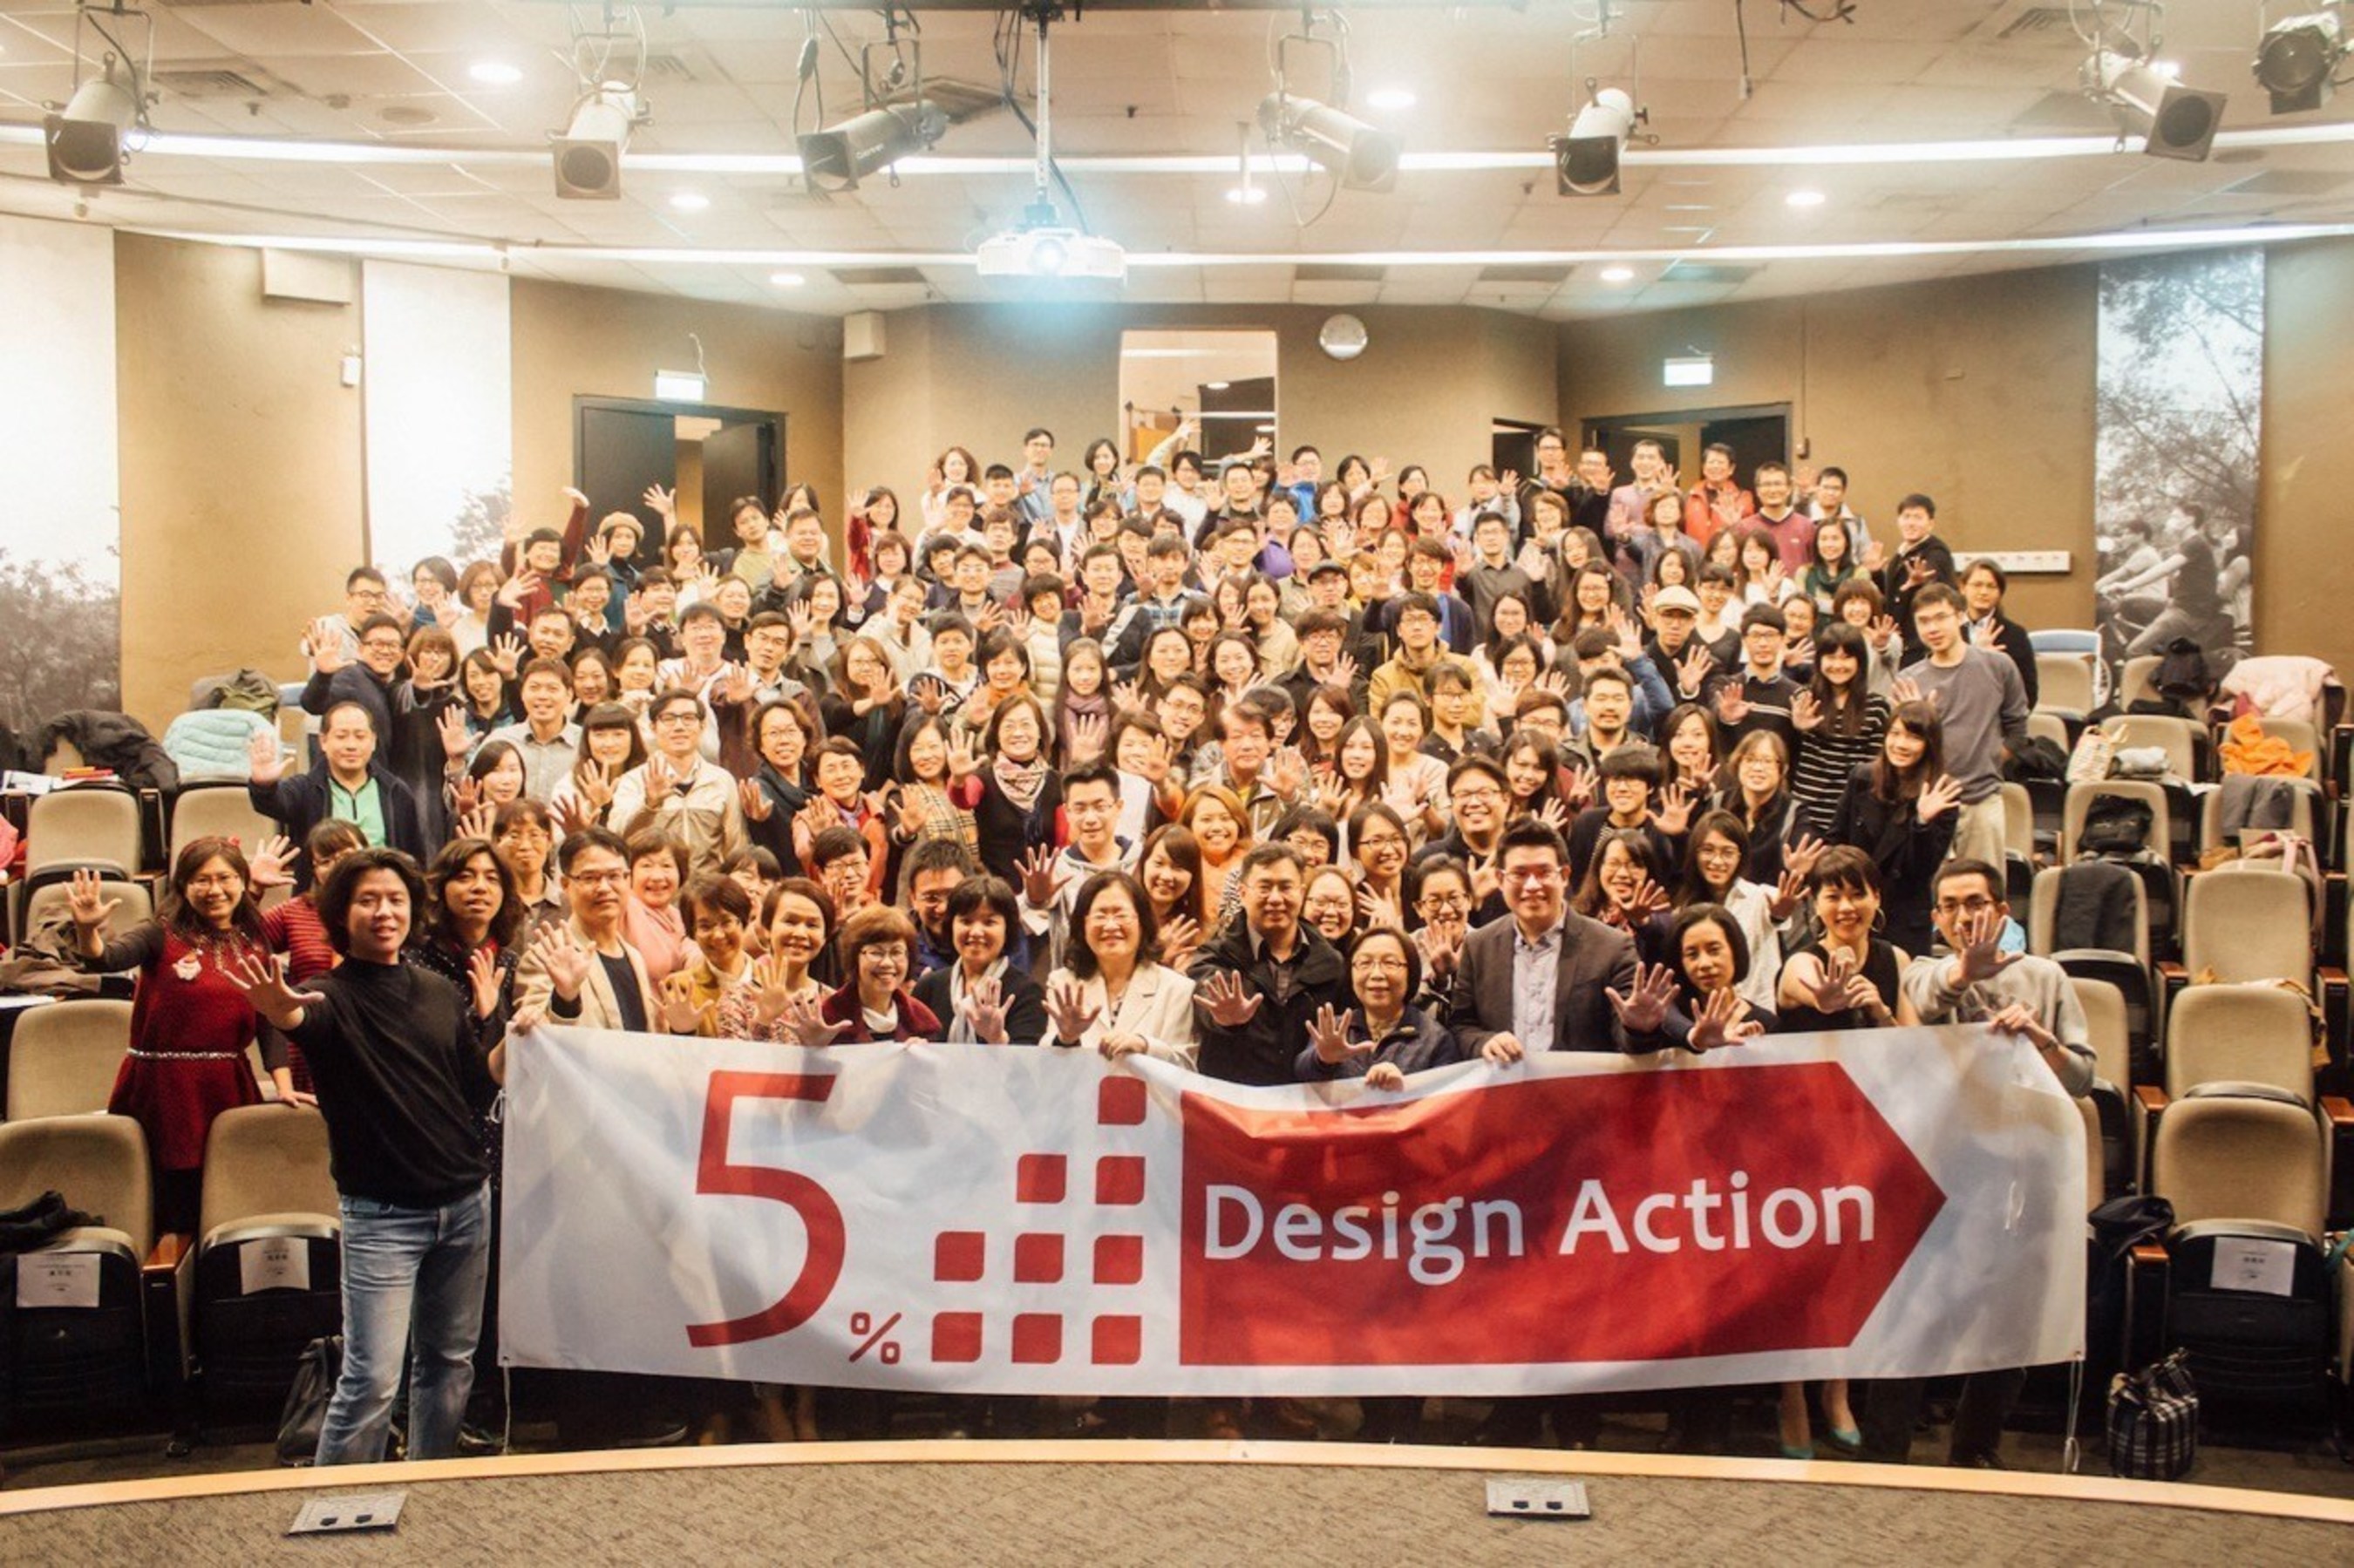 The 5% Design Action team in Taiwan. 5% Design Action took home the Special Award for Social Design of the Golden Pin Design Award 2016 at the the WDC Taipei 2016 International Design Gala. Image courtesy WDC Taipei 2016.